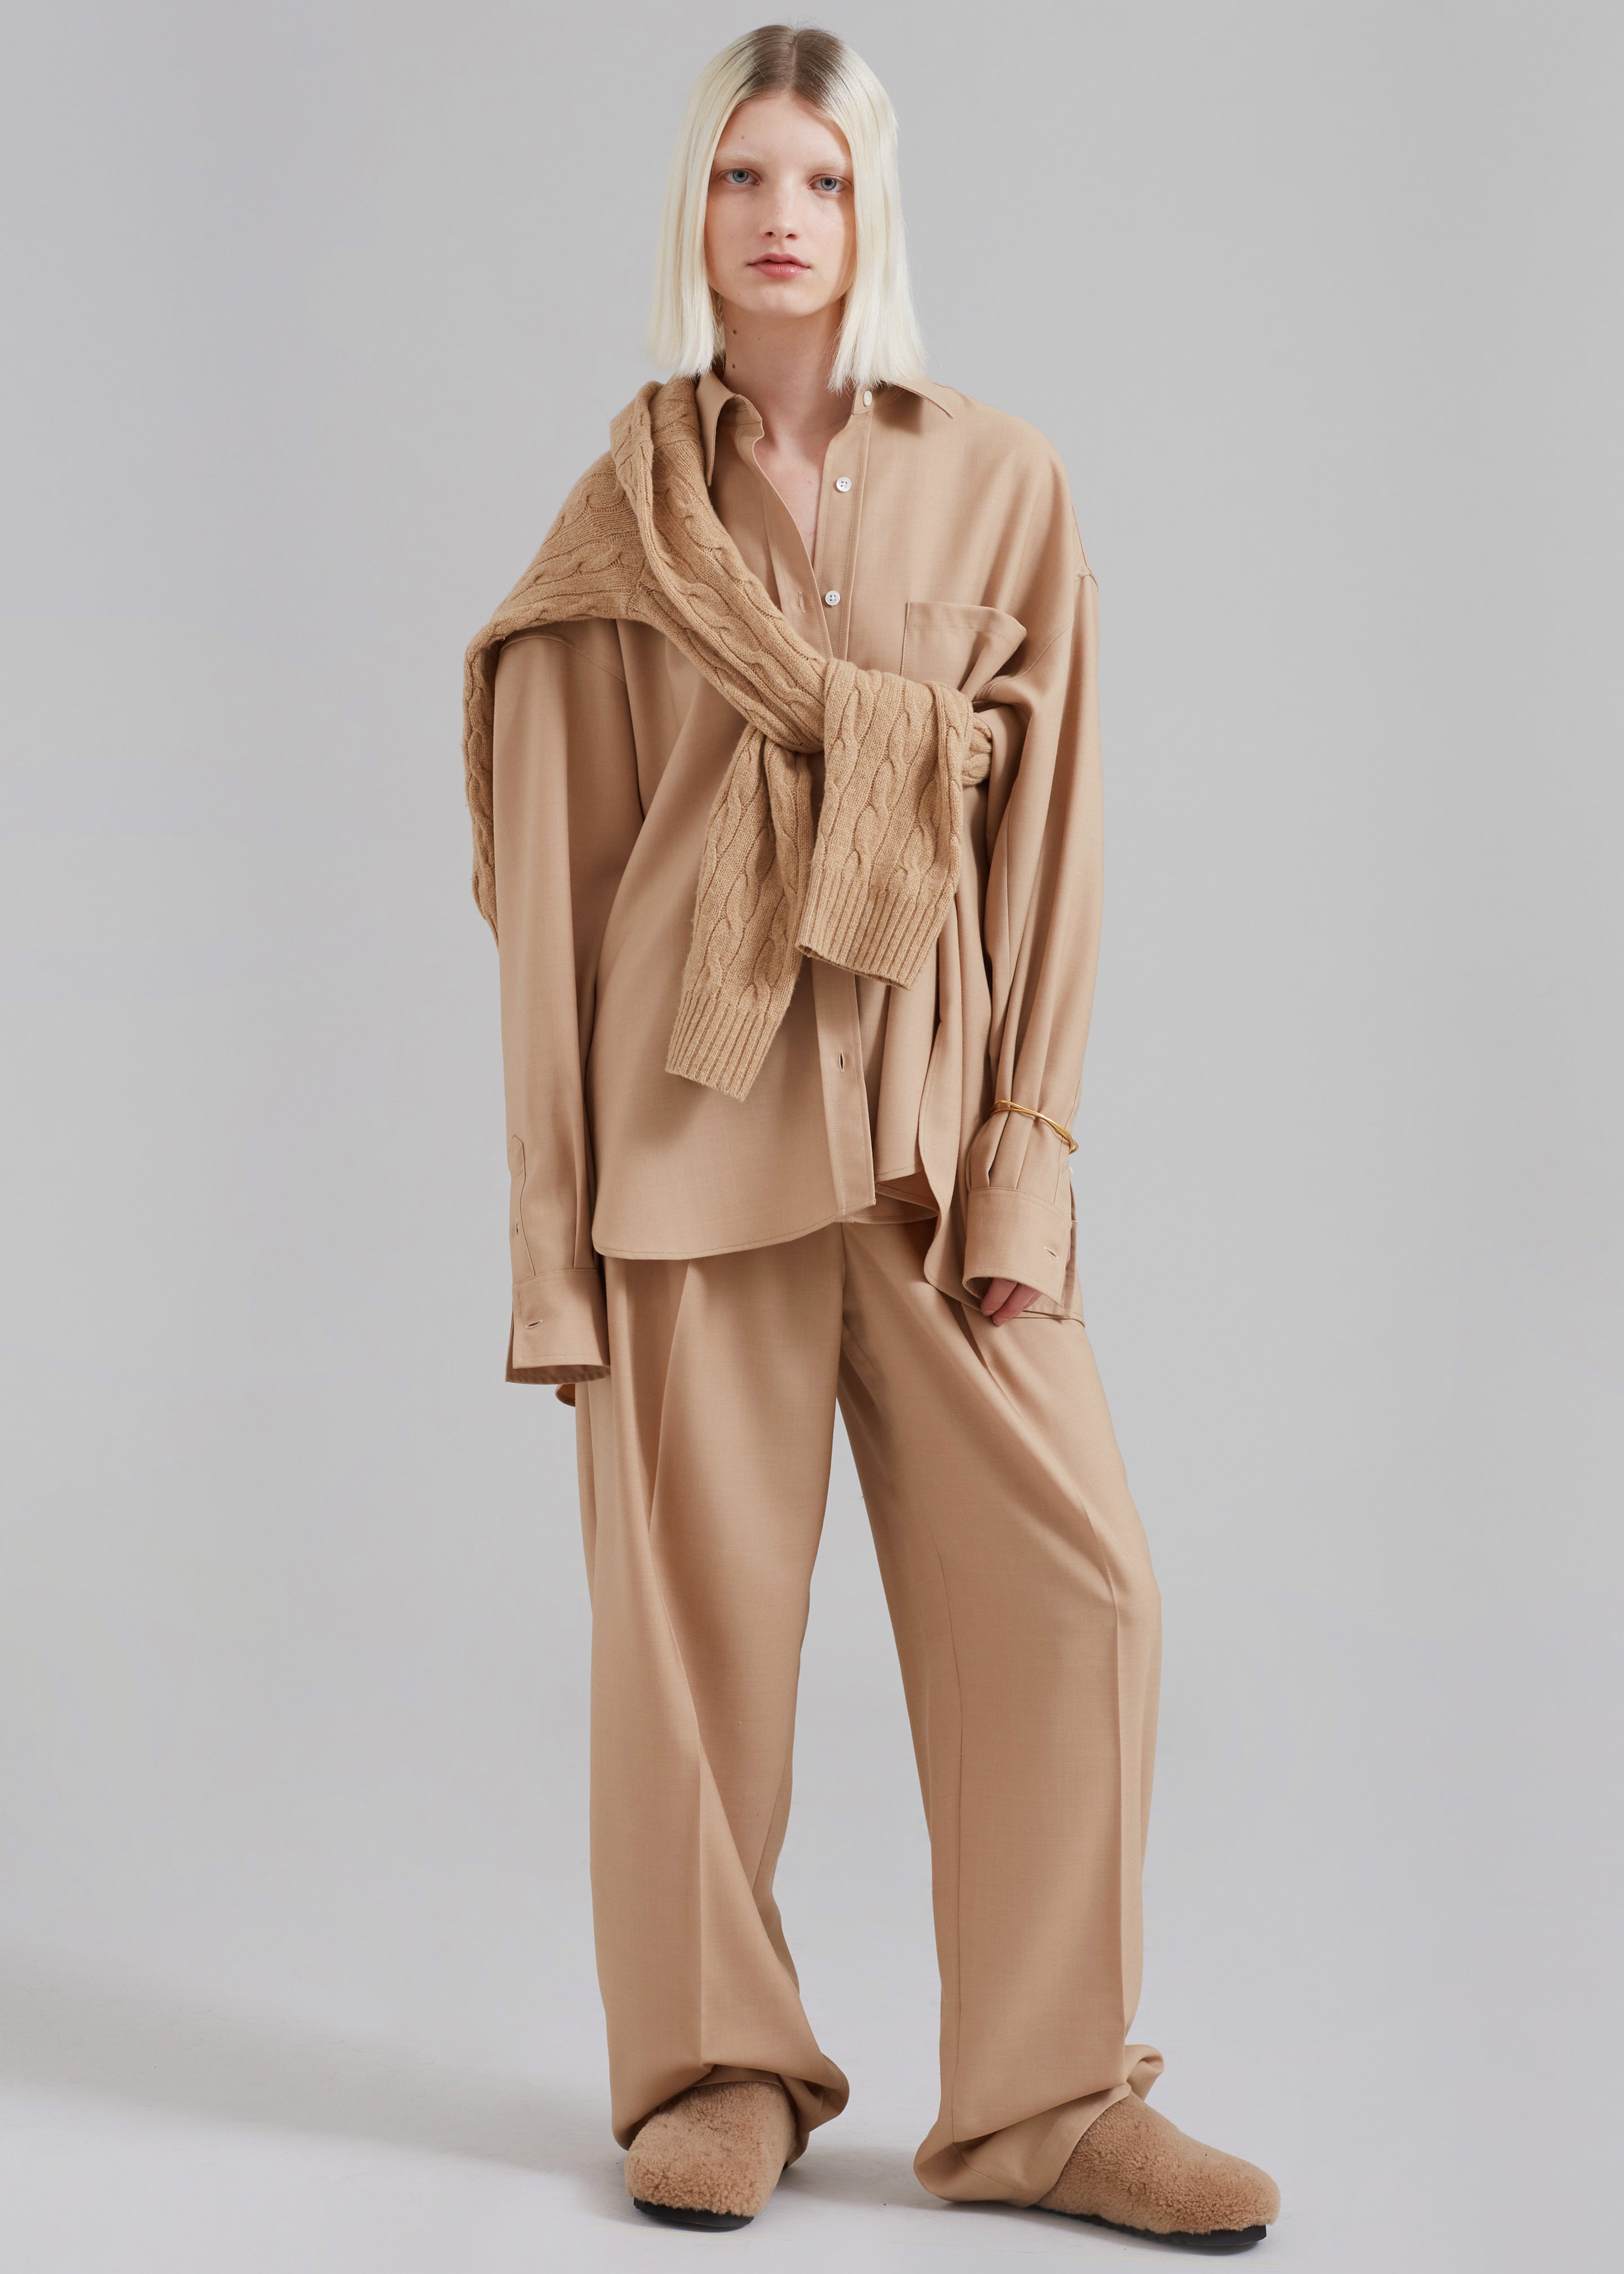 Tansy Pleated Twill Trousers - Camel